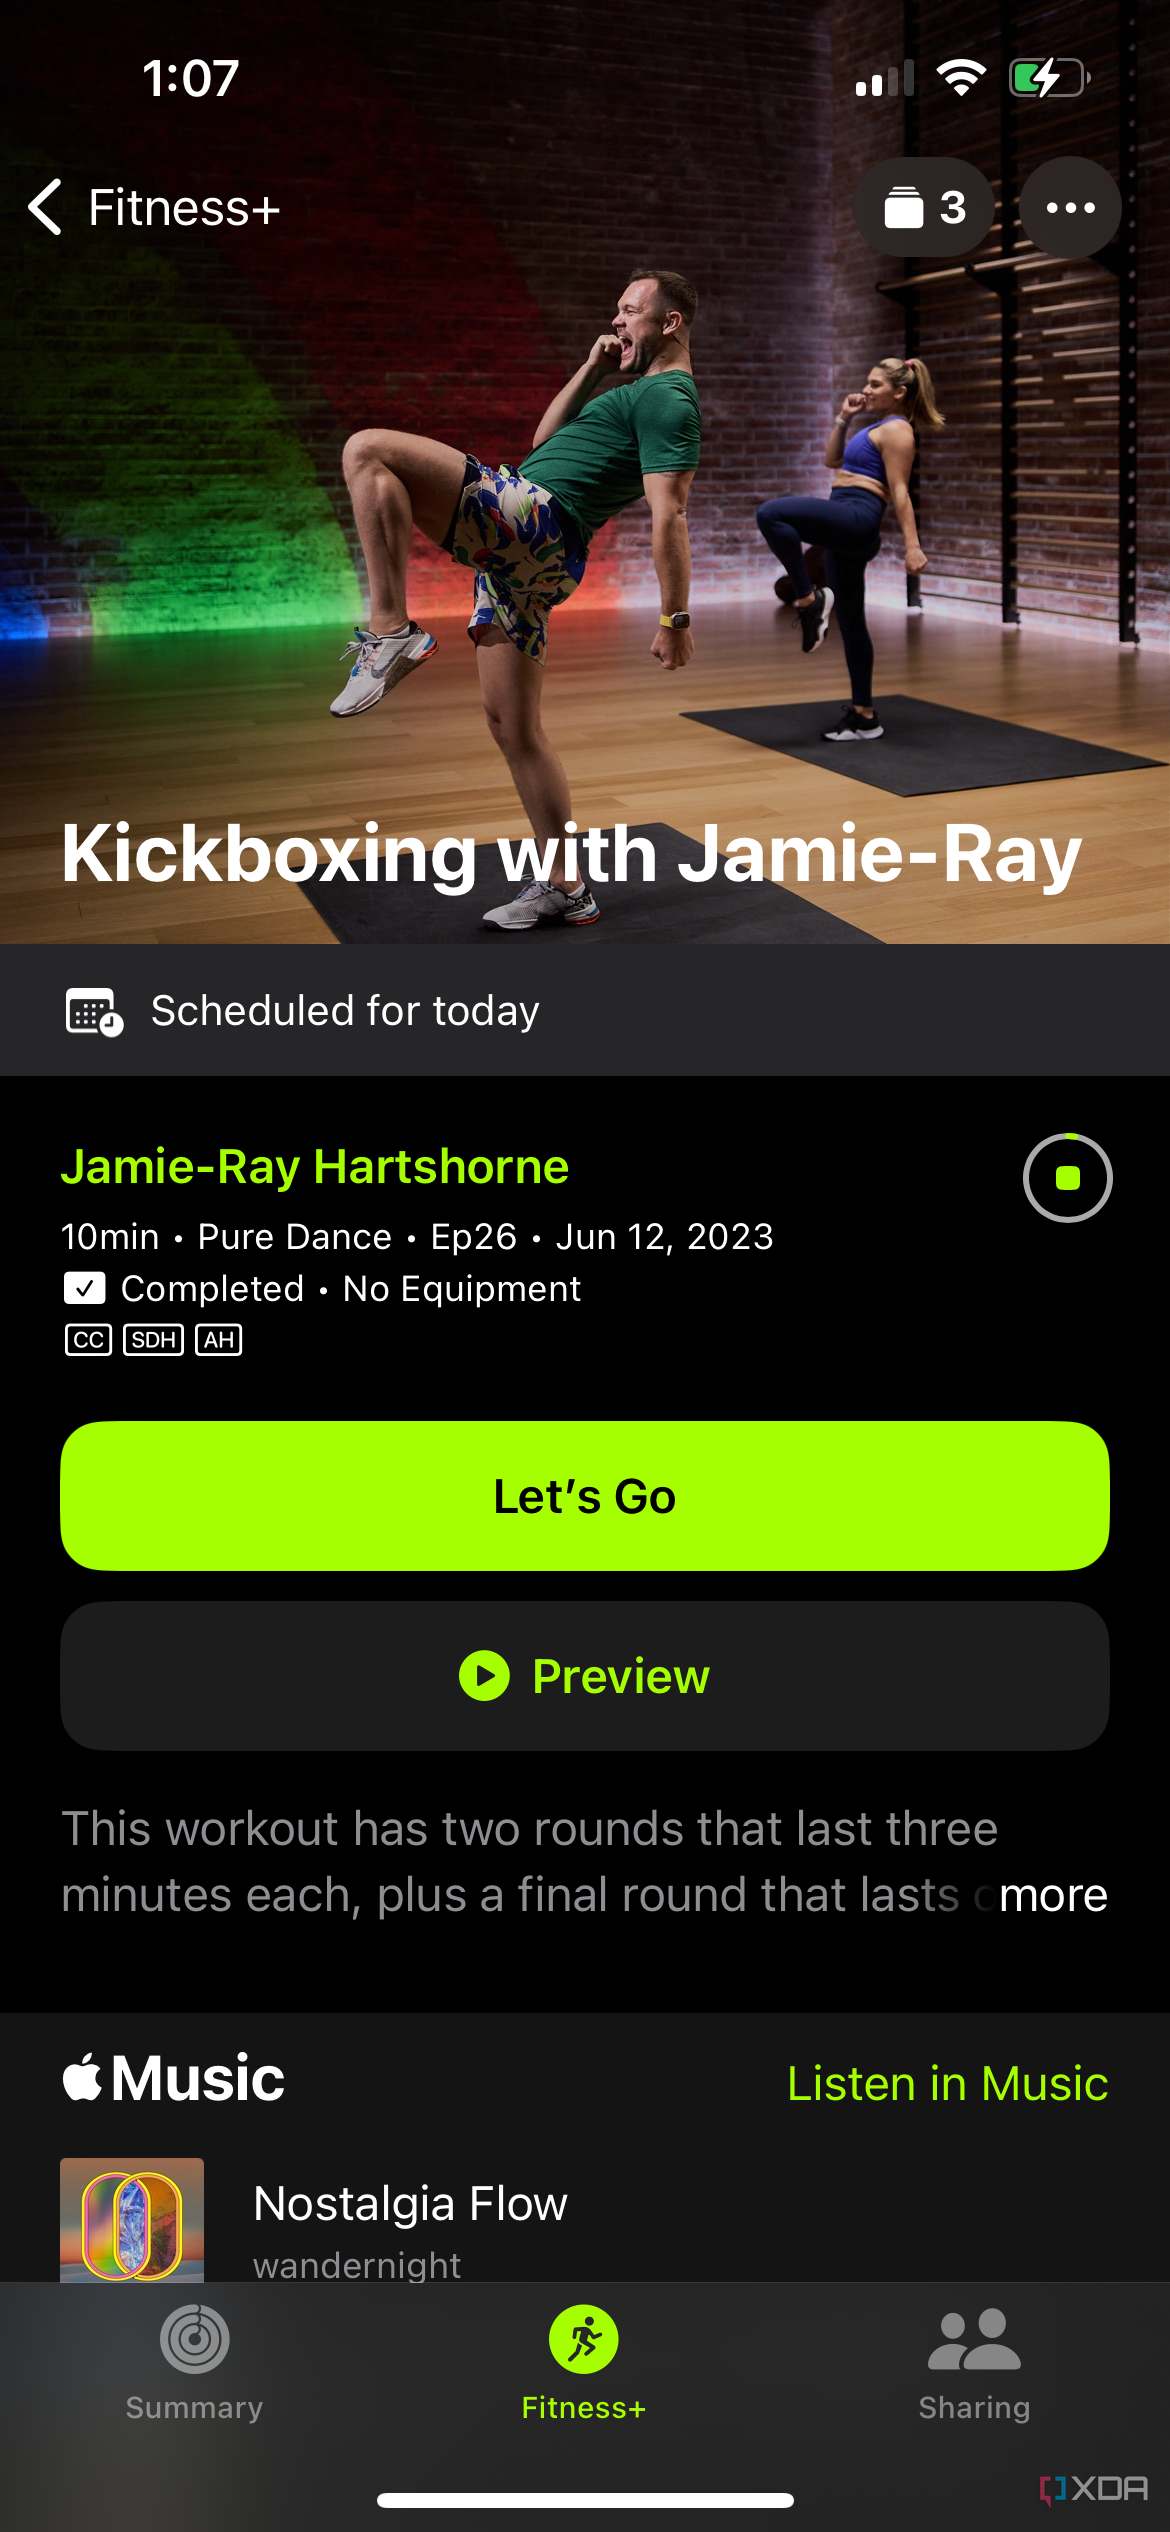 A kickboxing workout as part of a custom fitness plan in the Apple Fitness Plus section of the Apple Fitness app